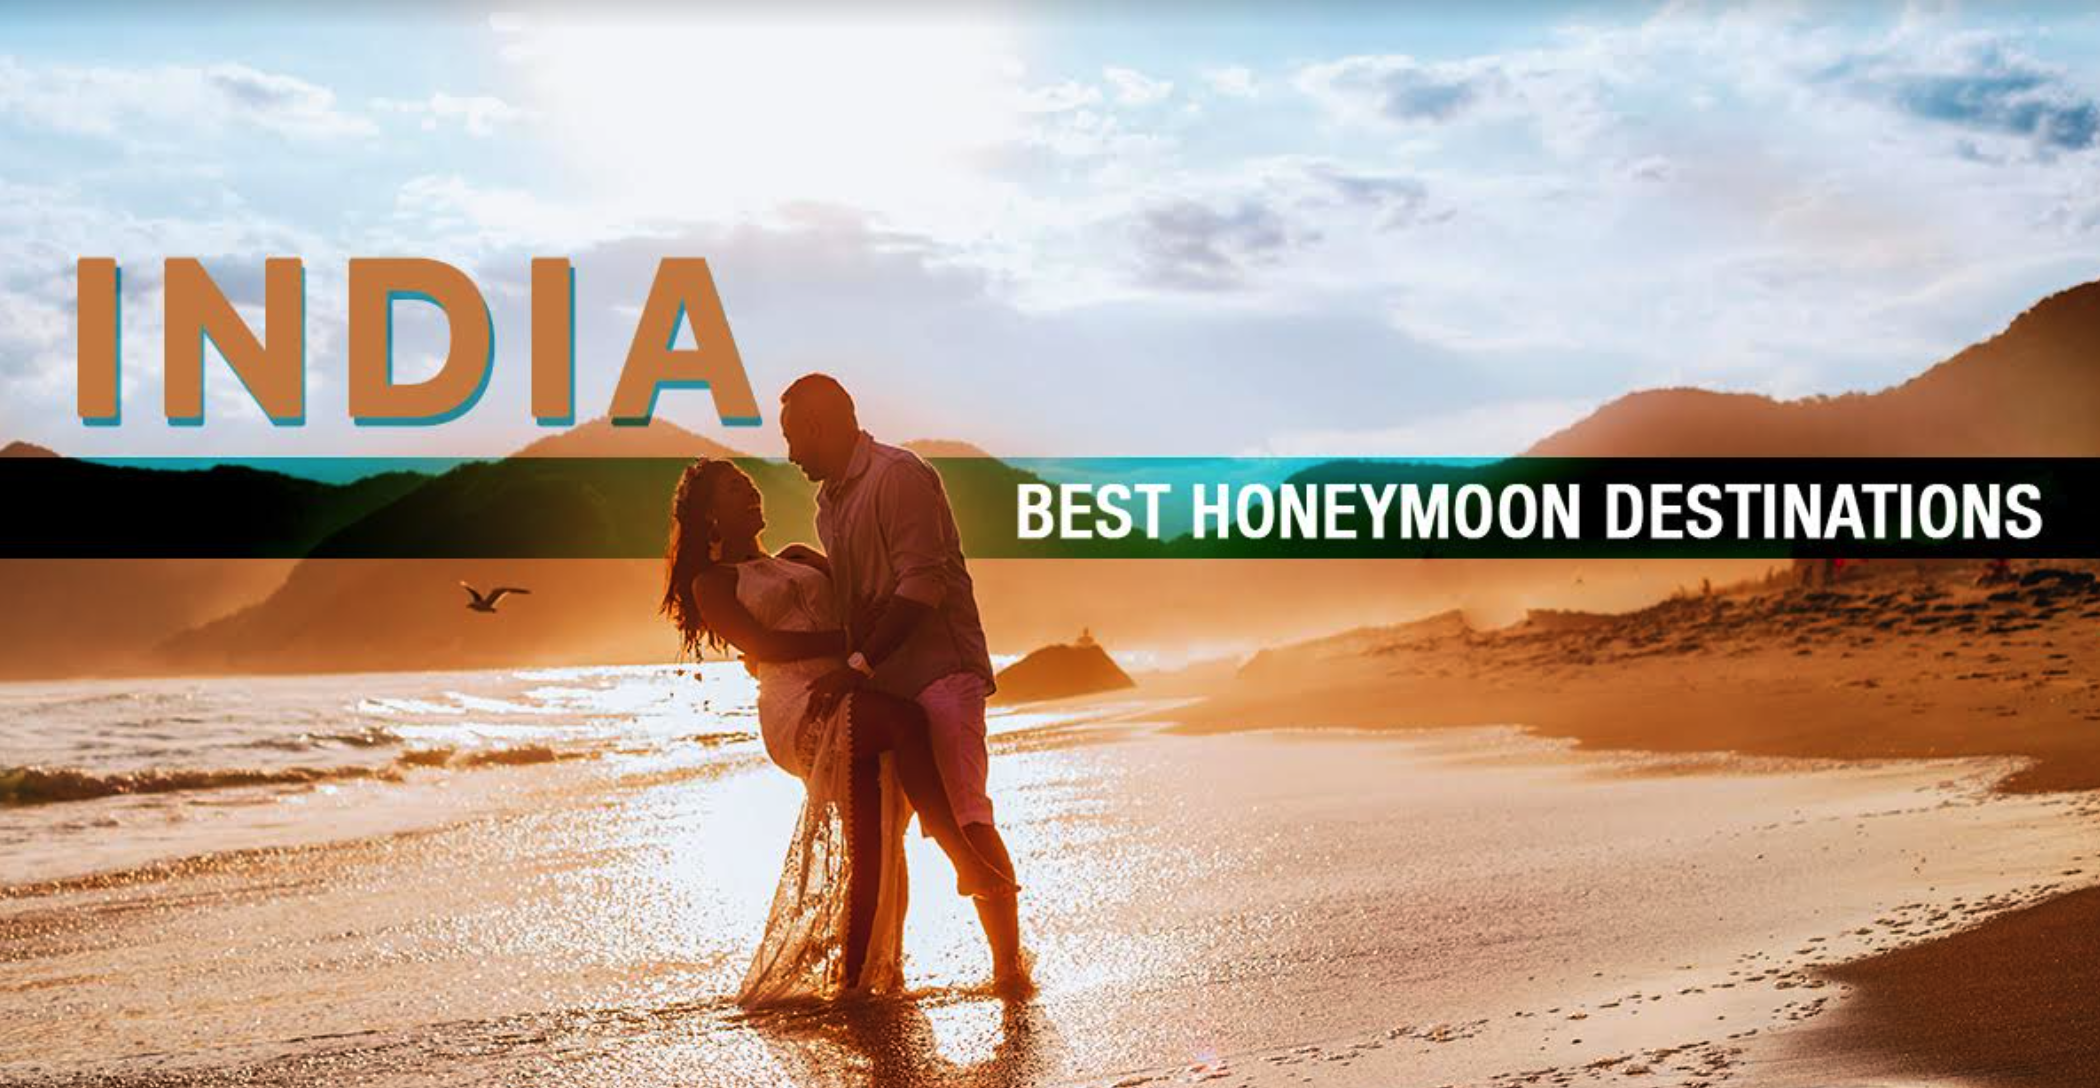 27 Romantic Honeymoon Destinations In India For A Dreamy Vacation